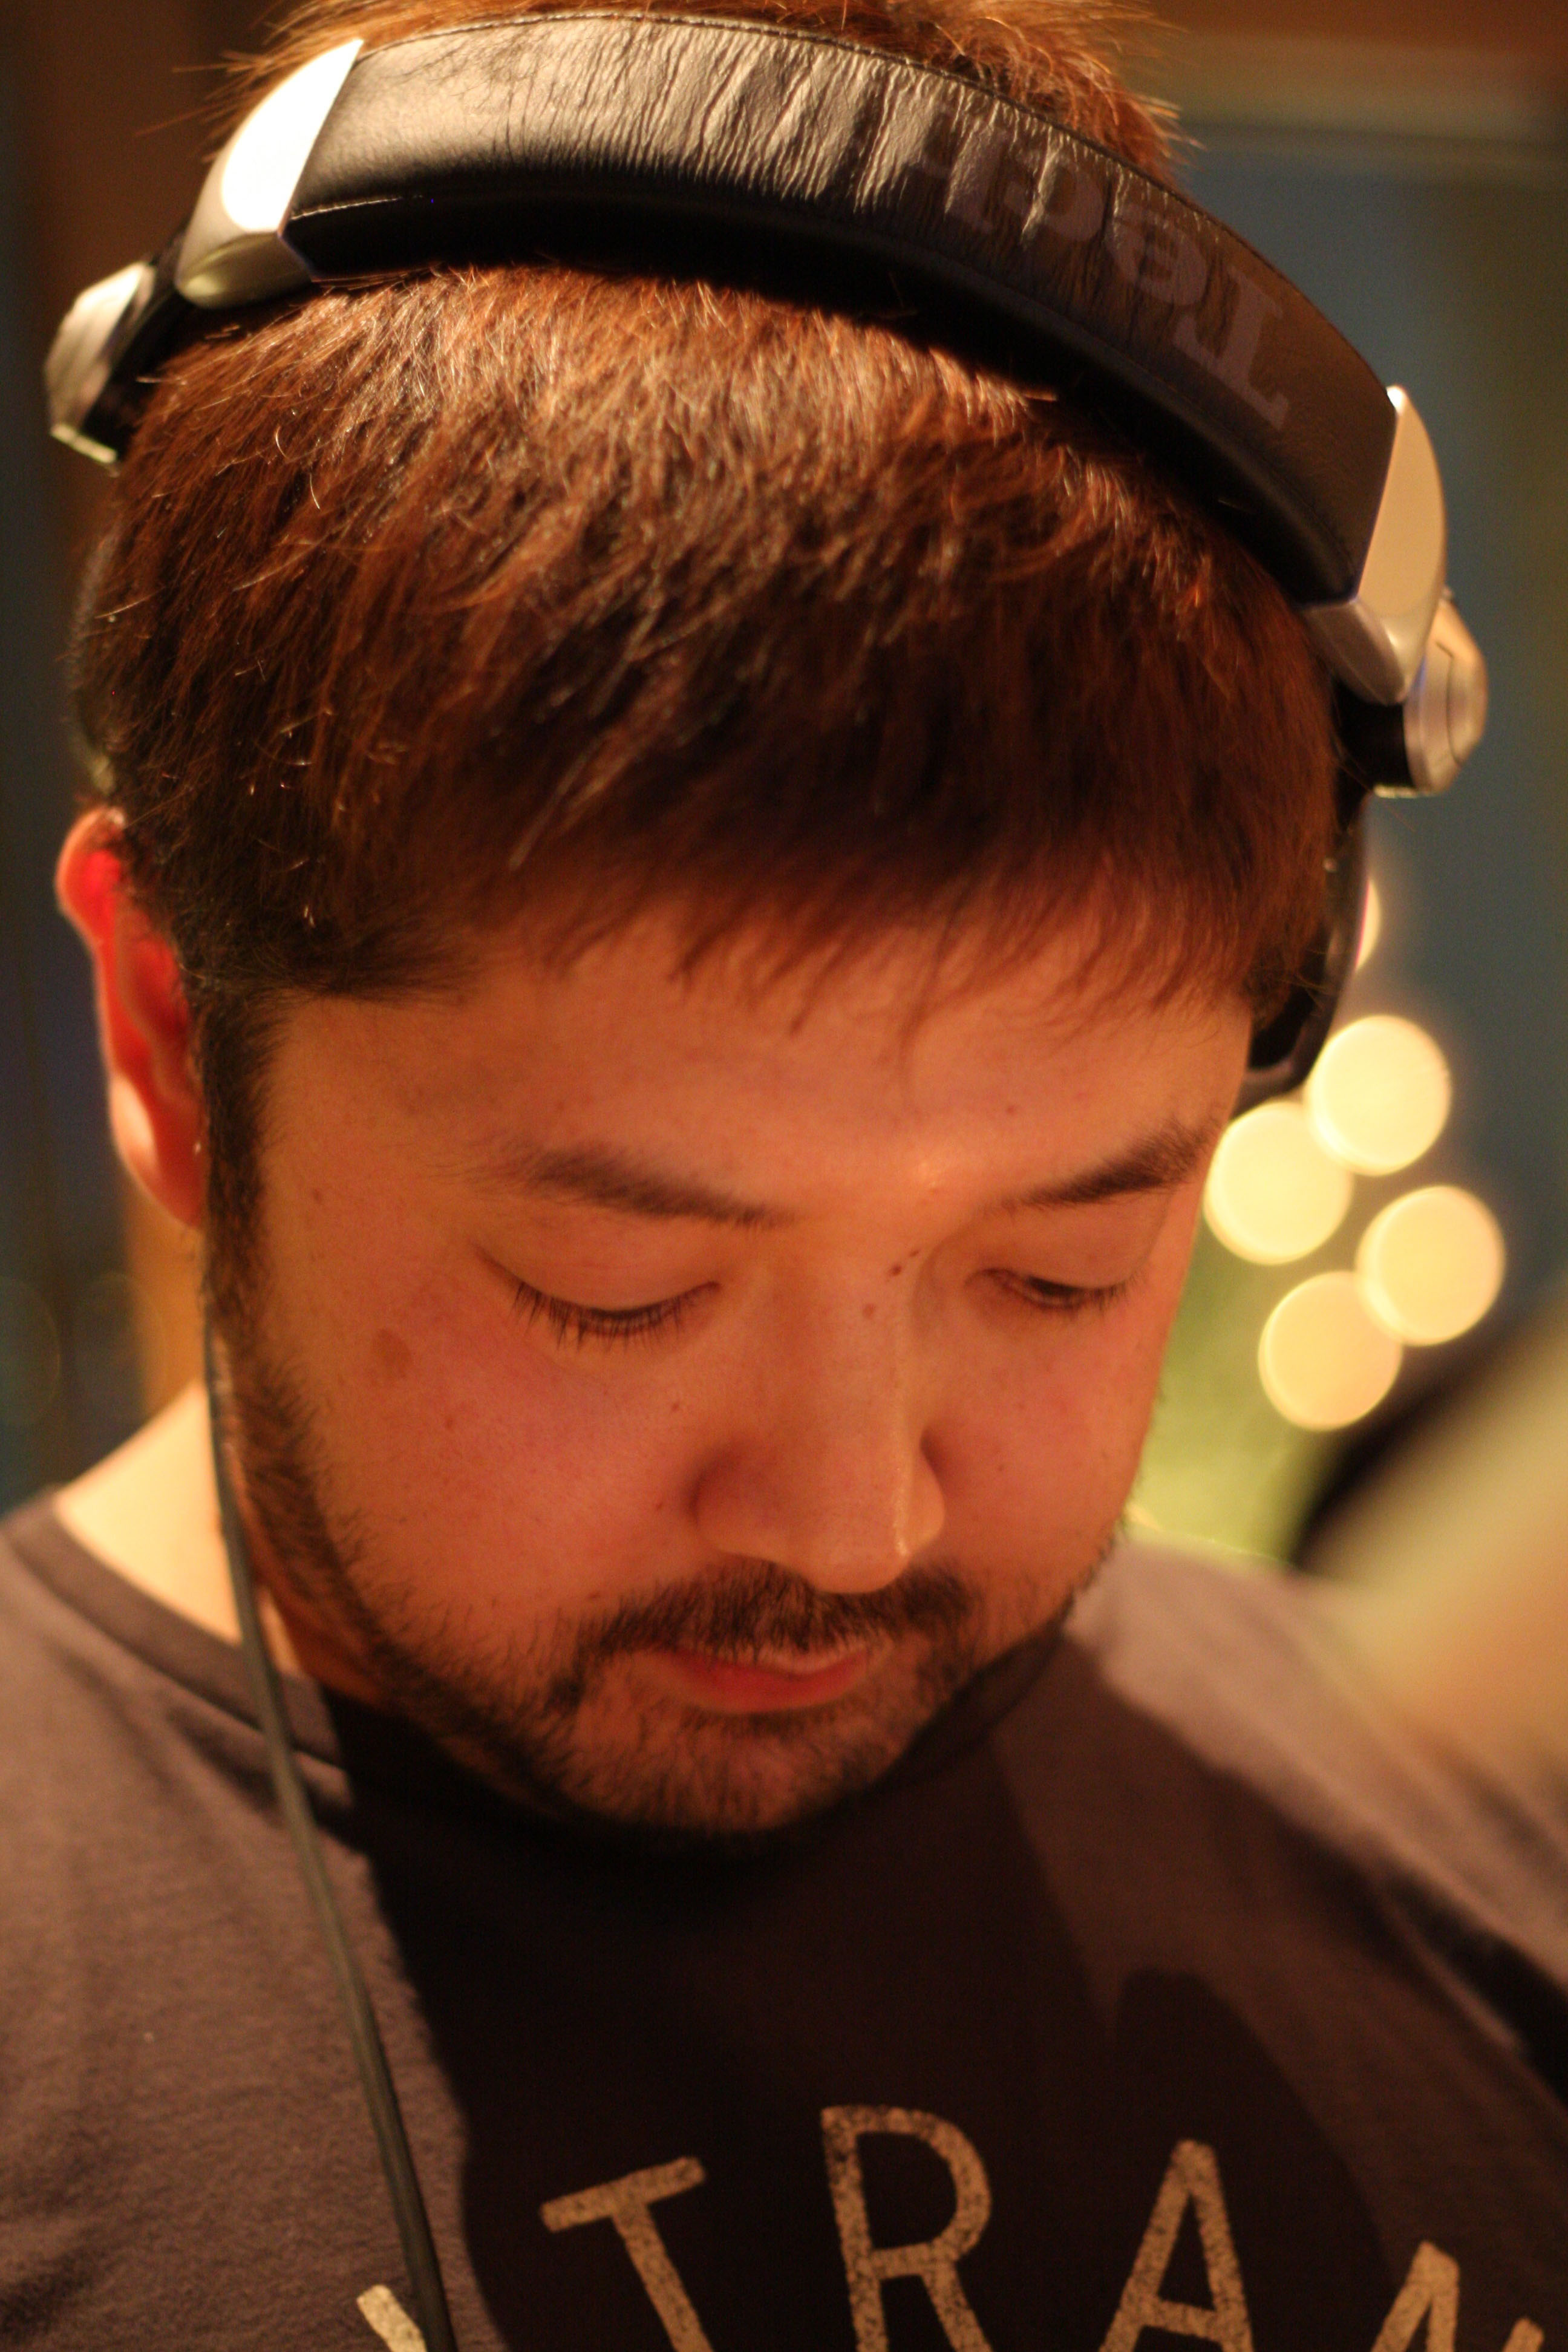 Nujabes #11